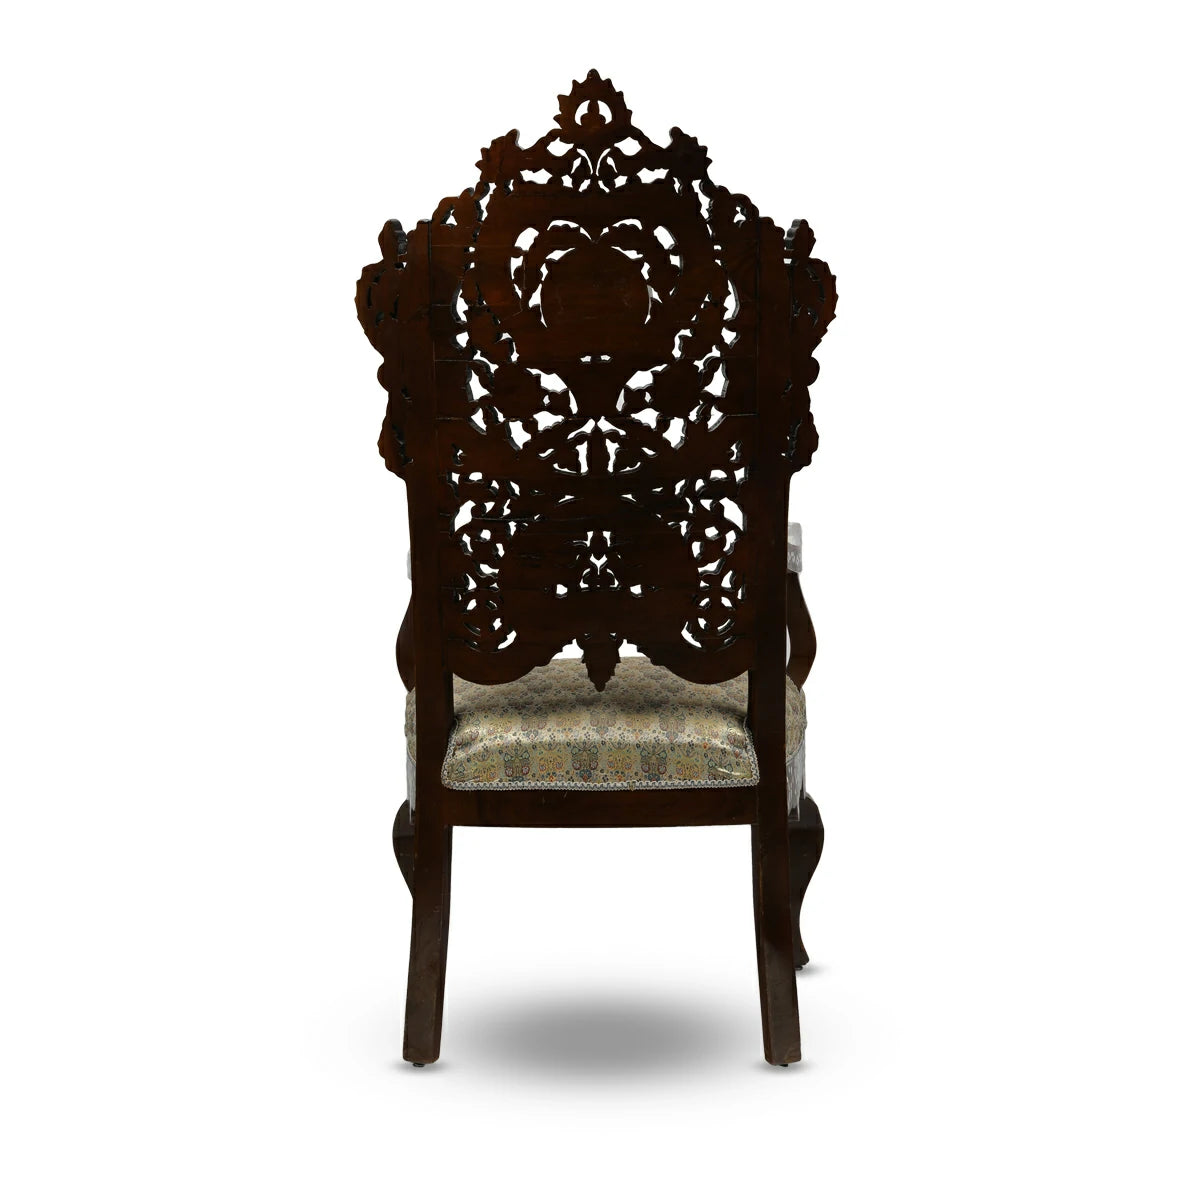 Back View of Early Ottoman Style Chair